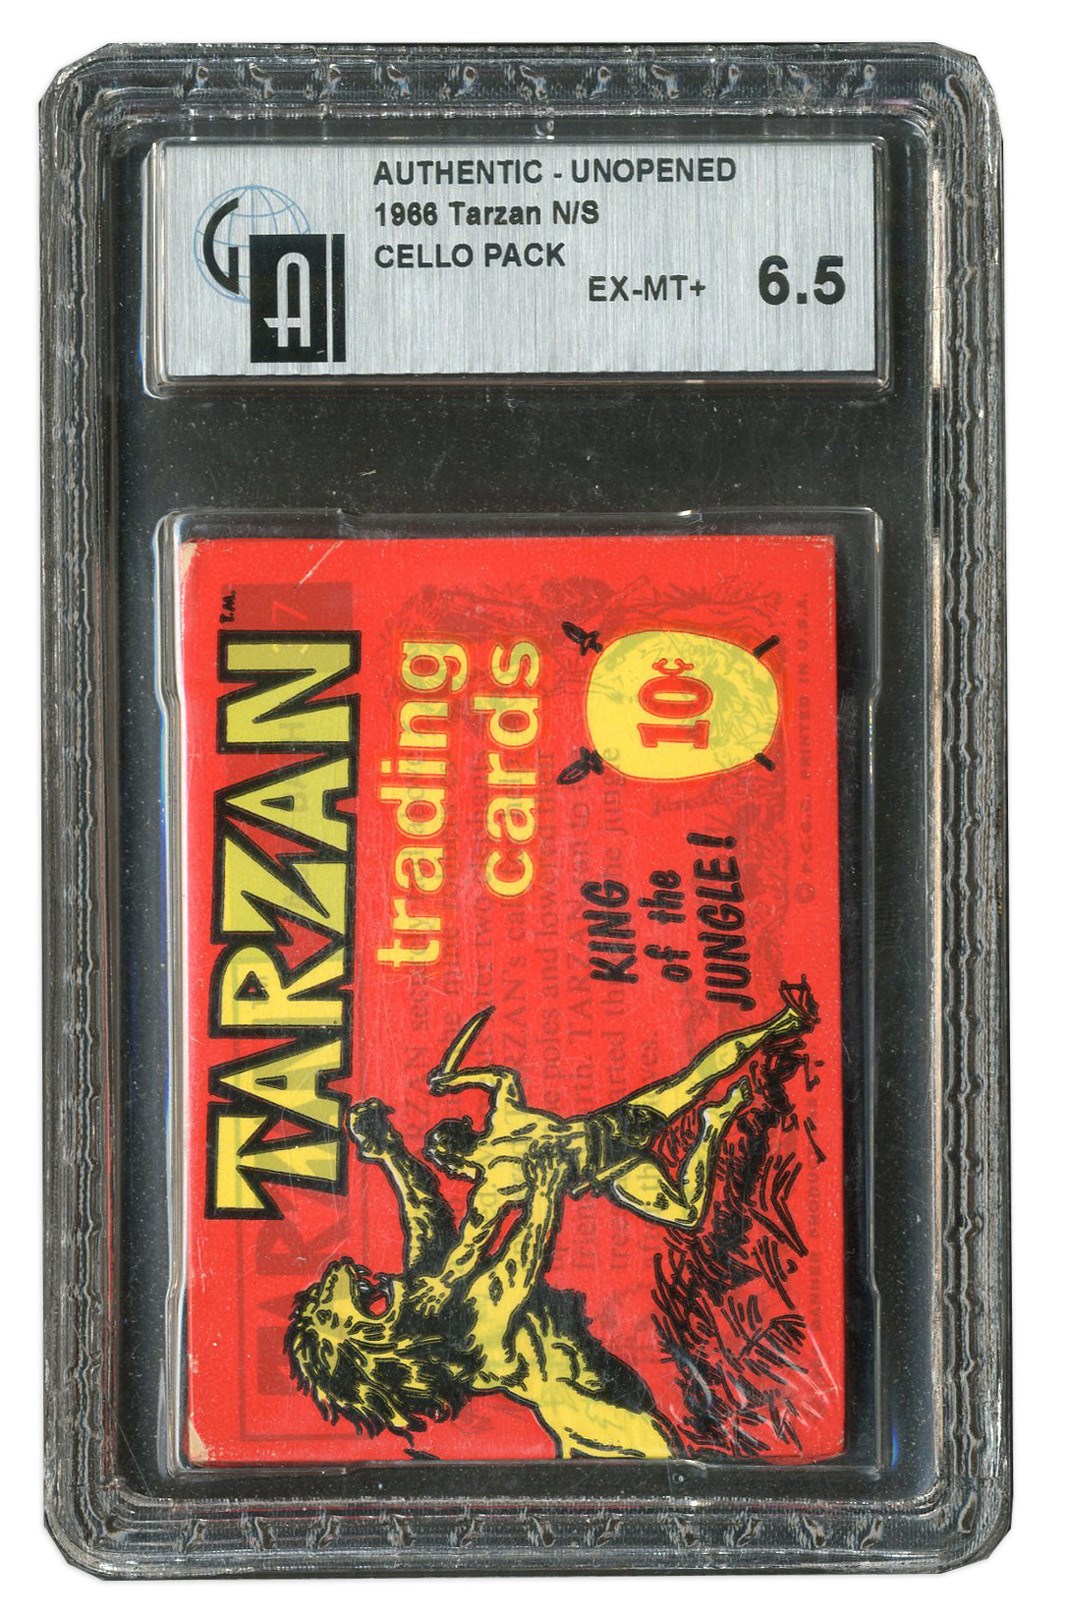 Baseball and Trading Cards - 1966 Topps Tarzan Unopened Cello Pack - GAI EX-MT 6